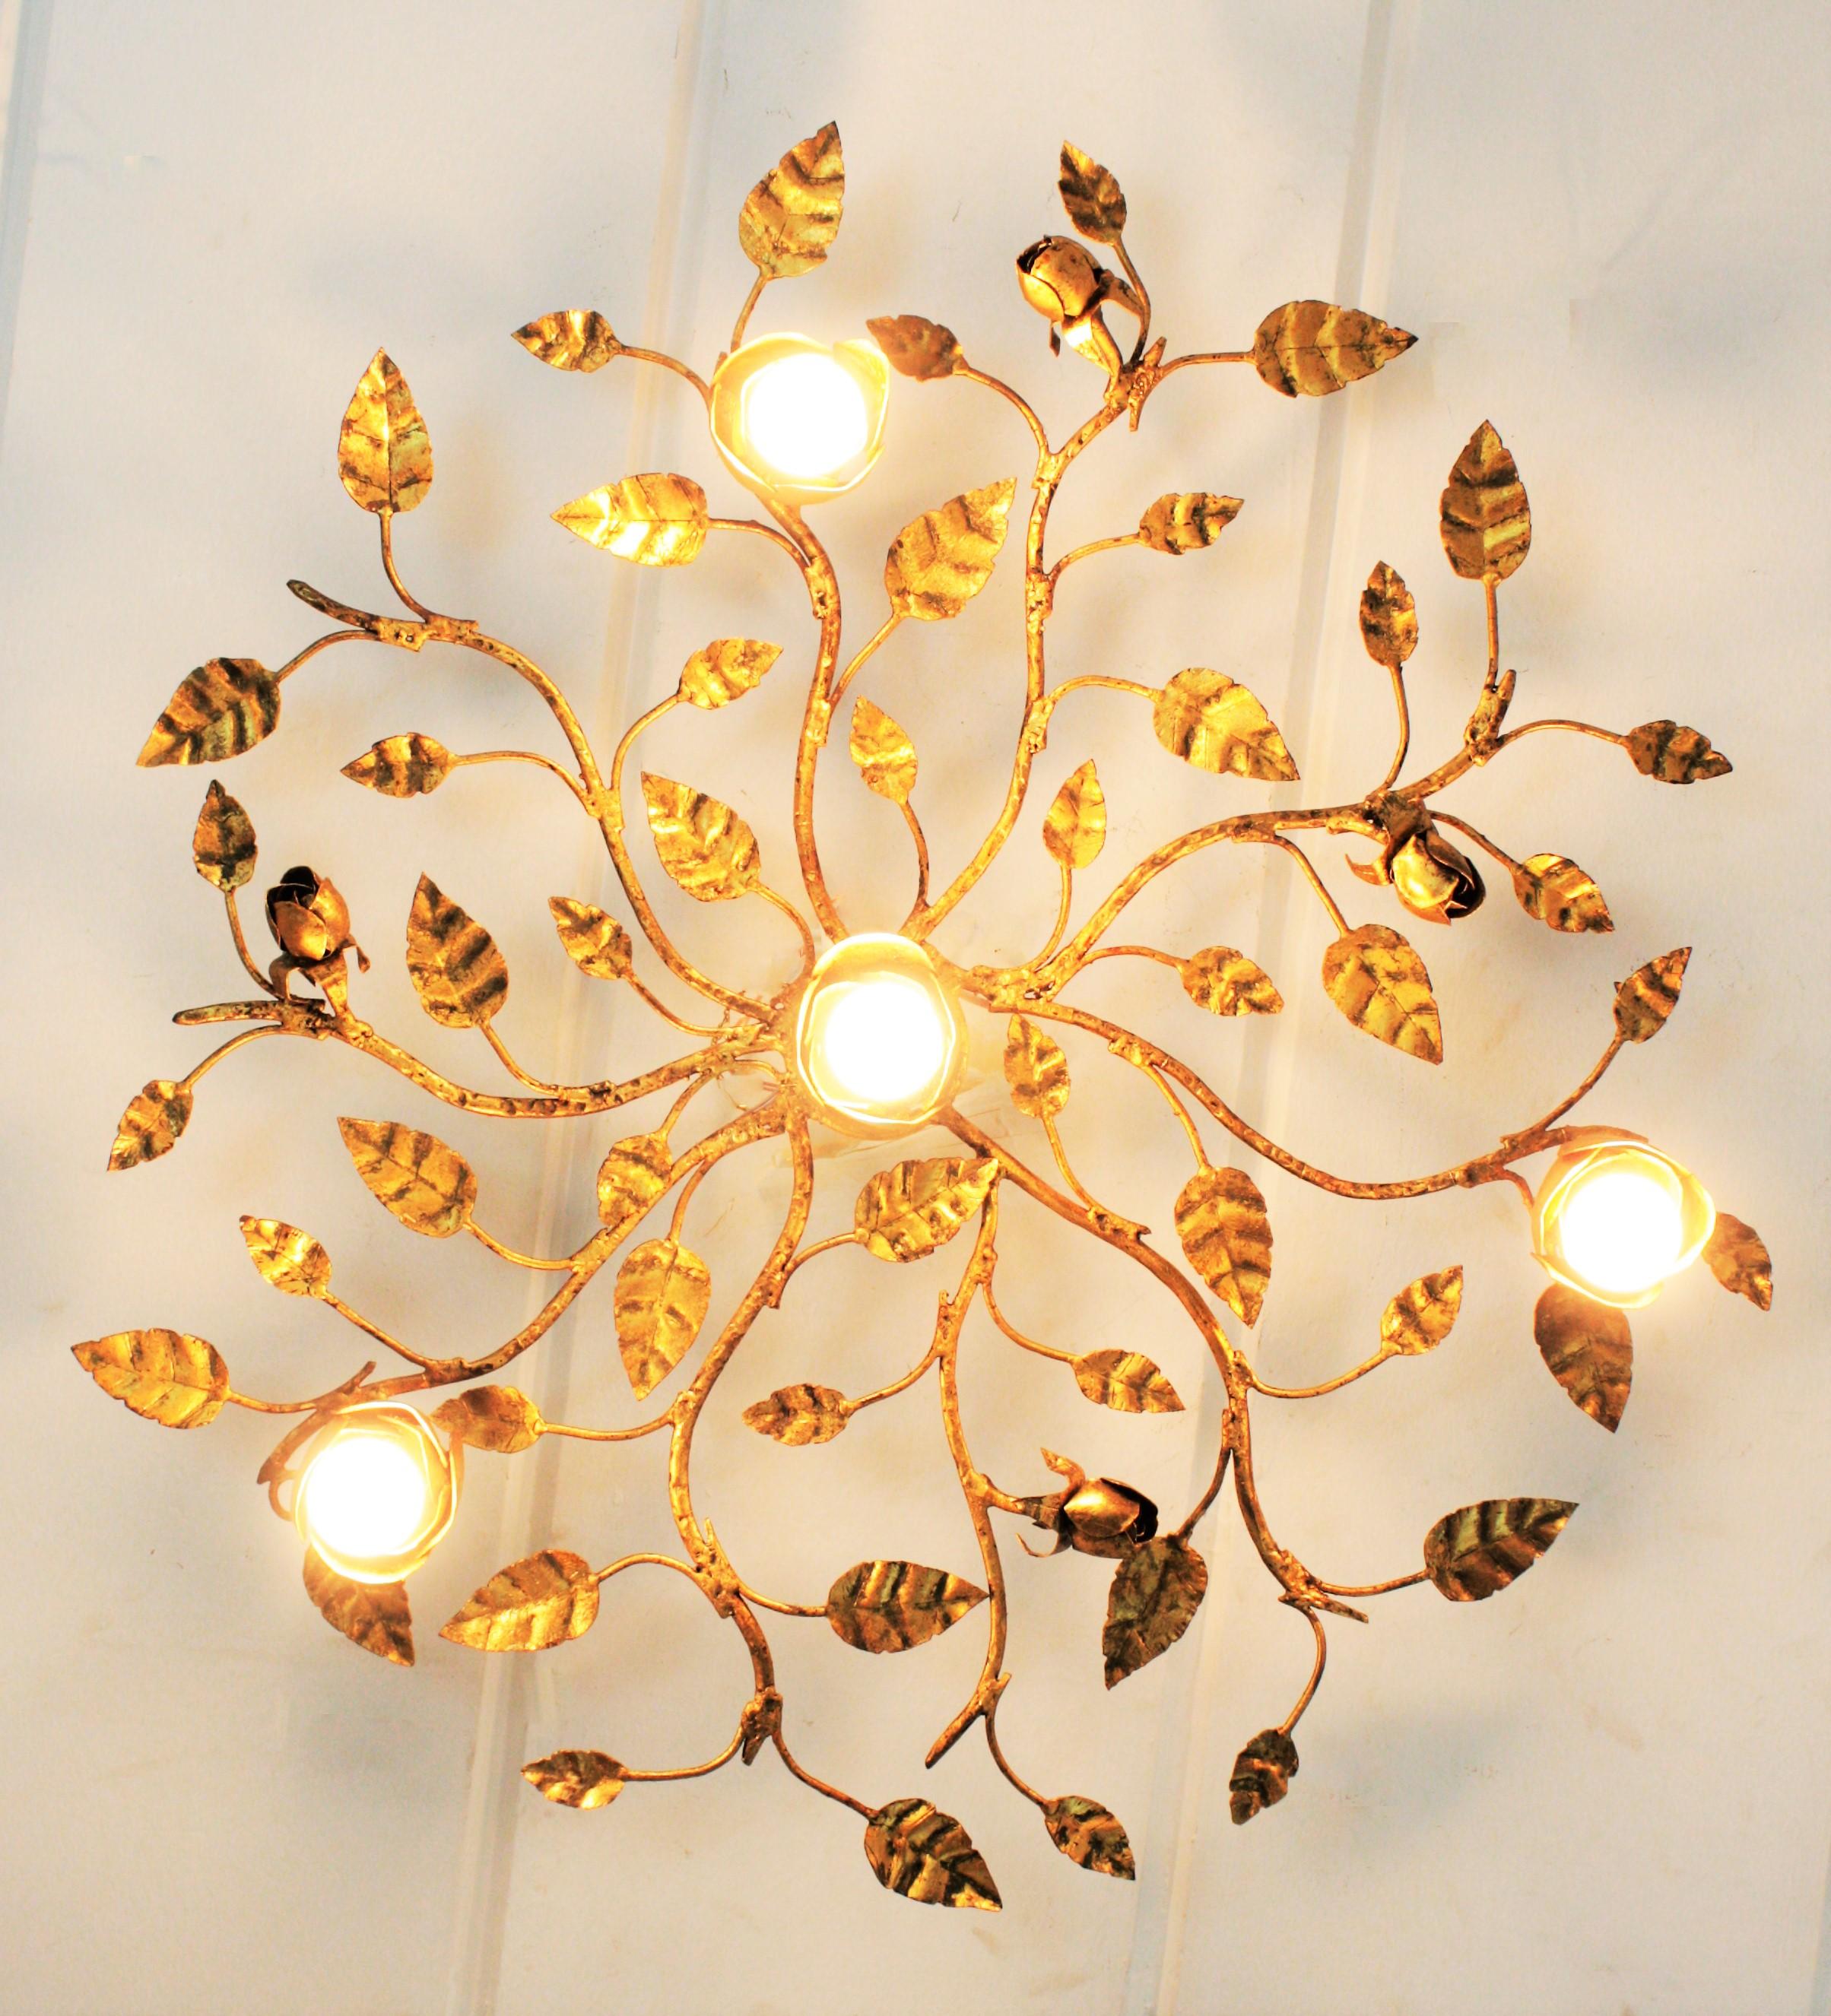 20th Century Spanish Foliage Floral Ceiling Light Fixture or Wall Sconce in Gilt Iron